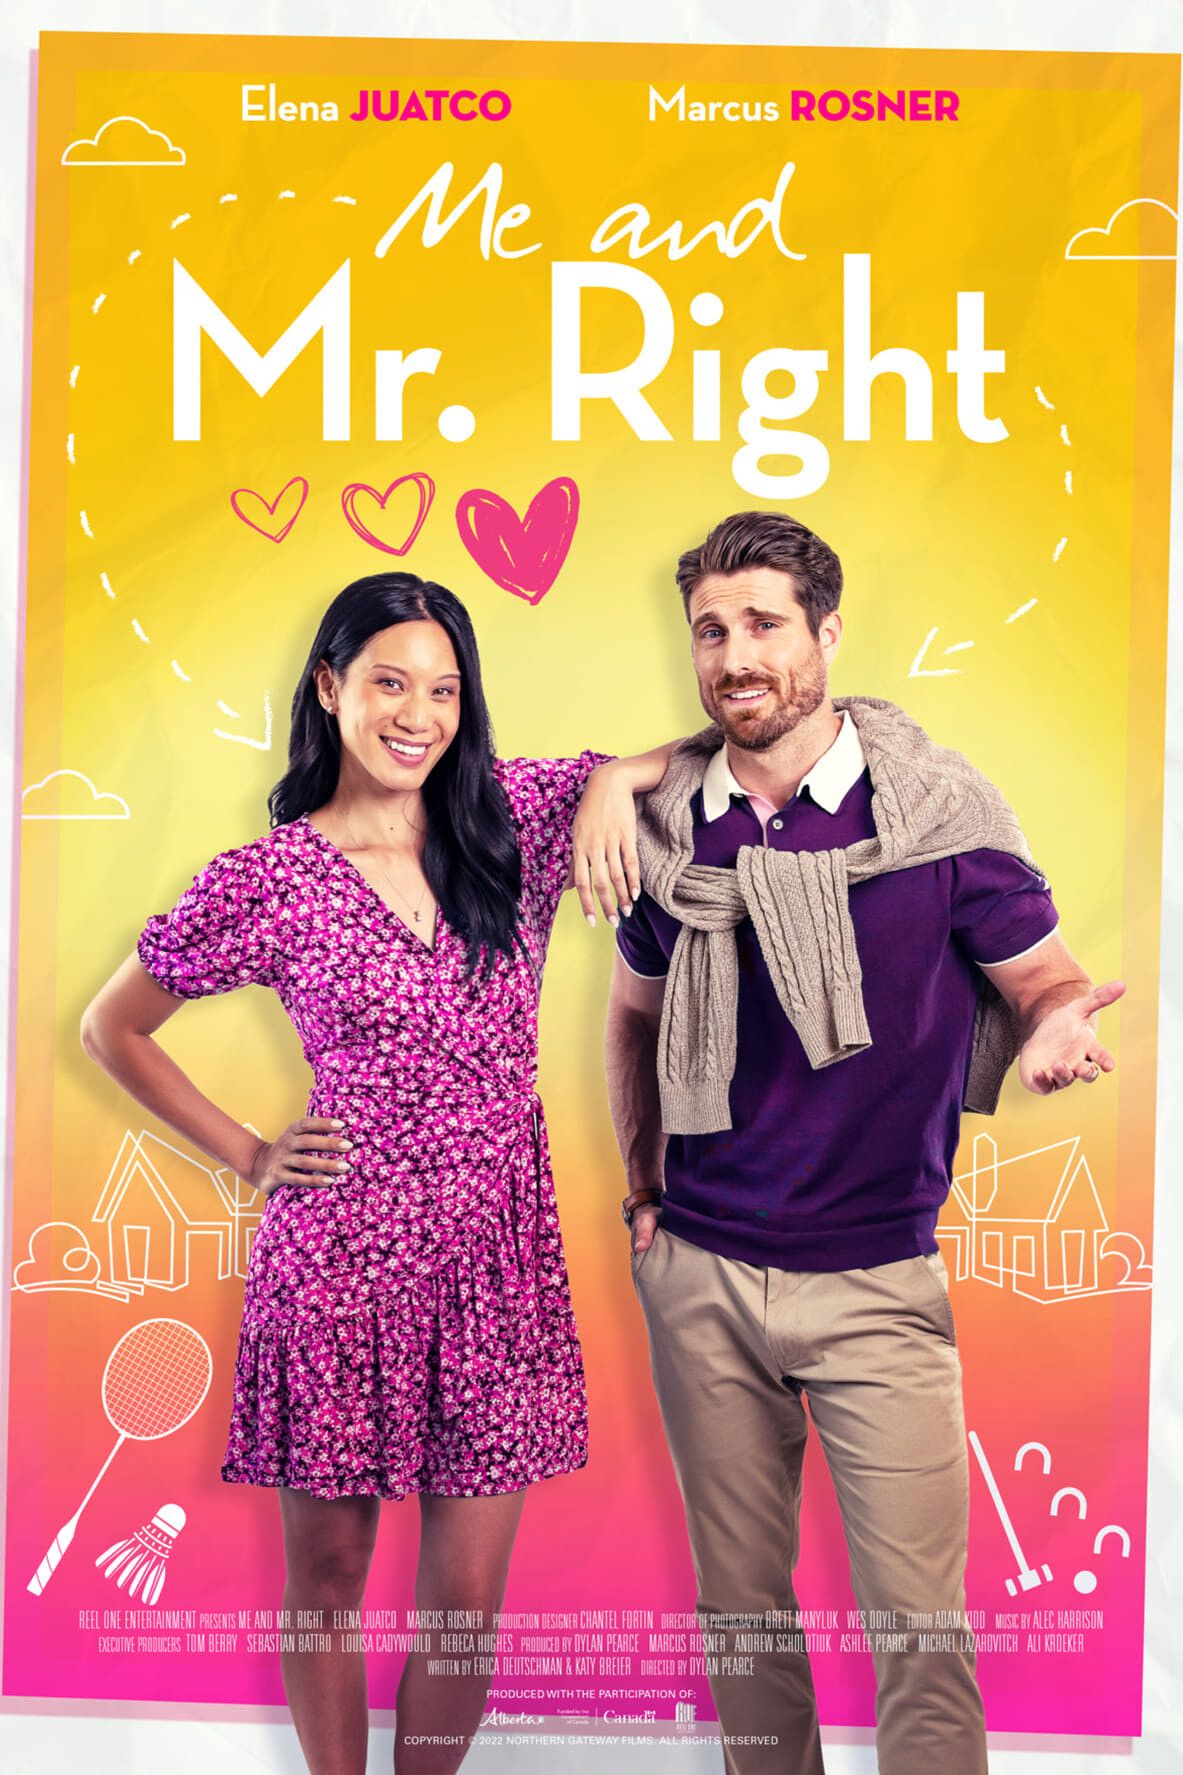 Me and Mr. Right Movie Information & Trailers